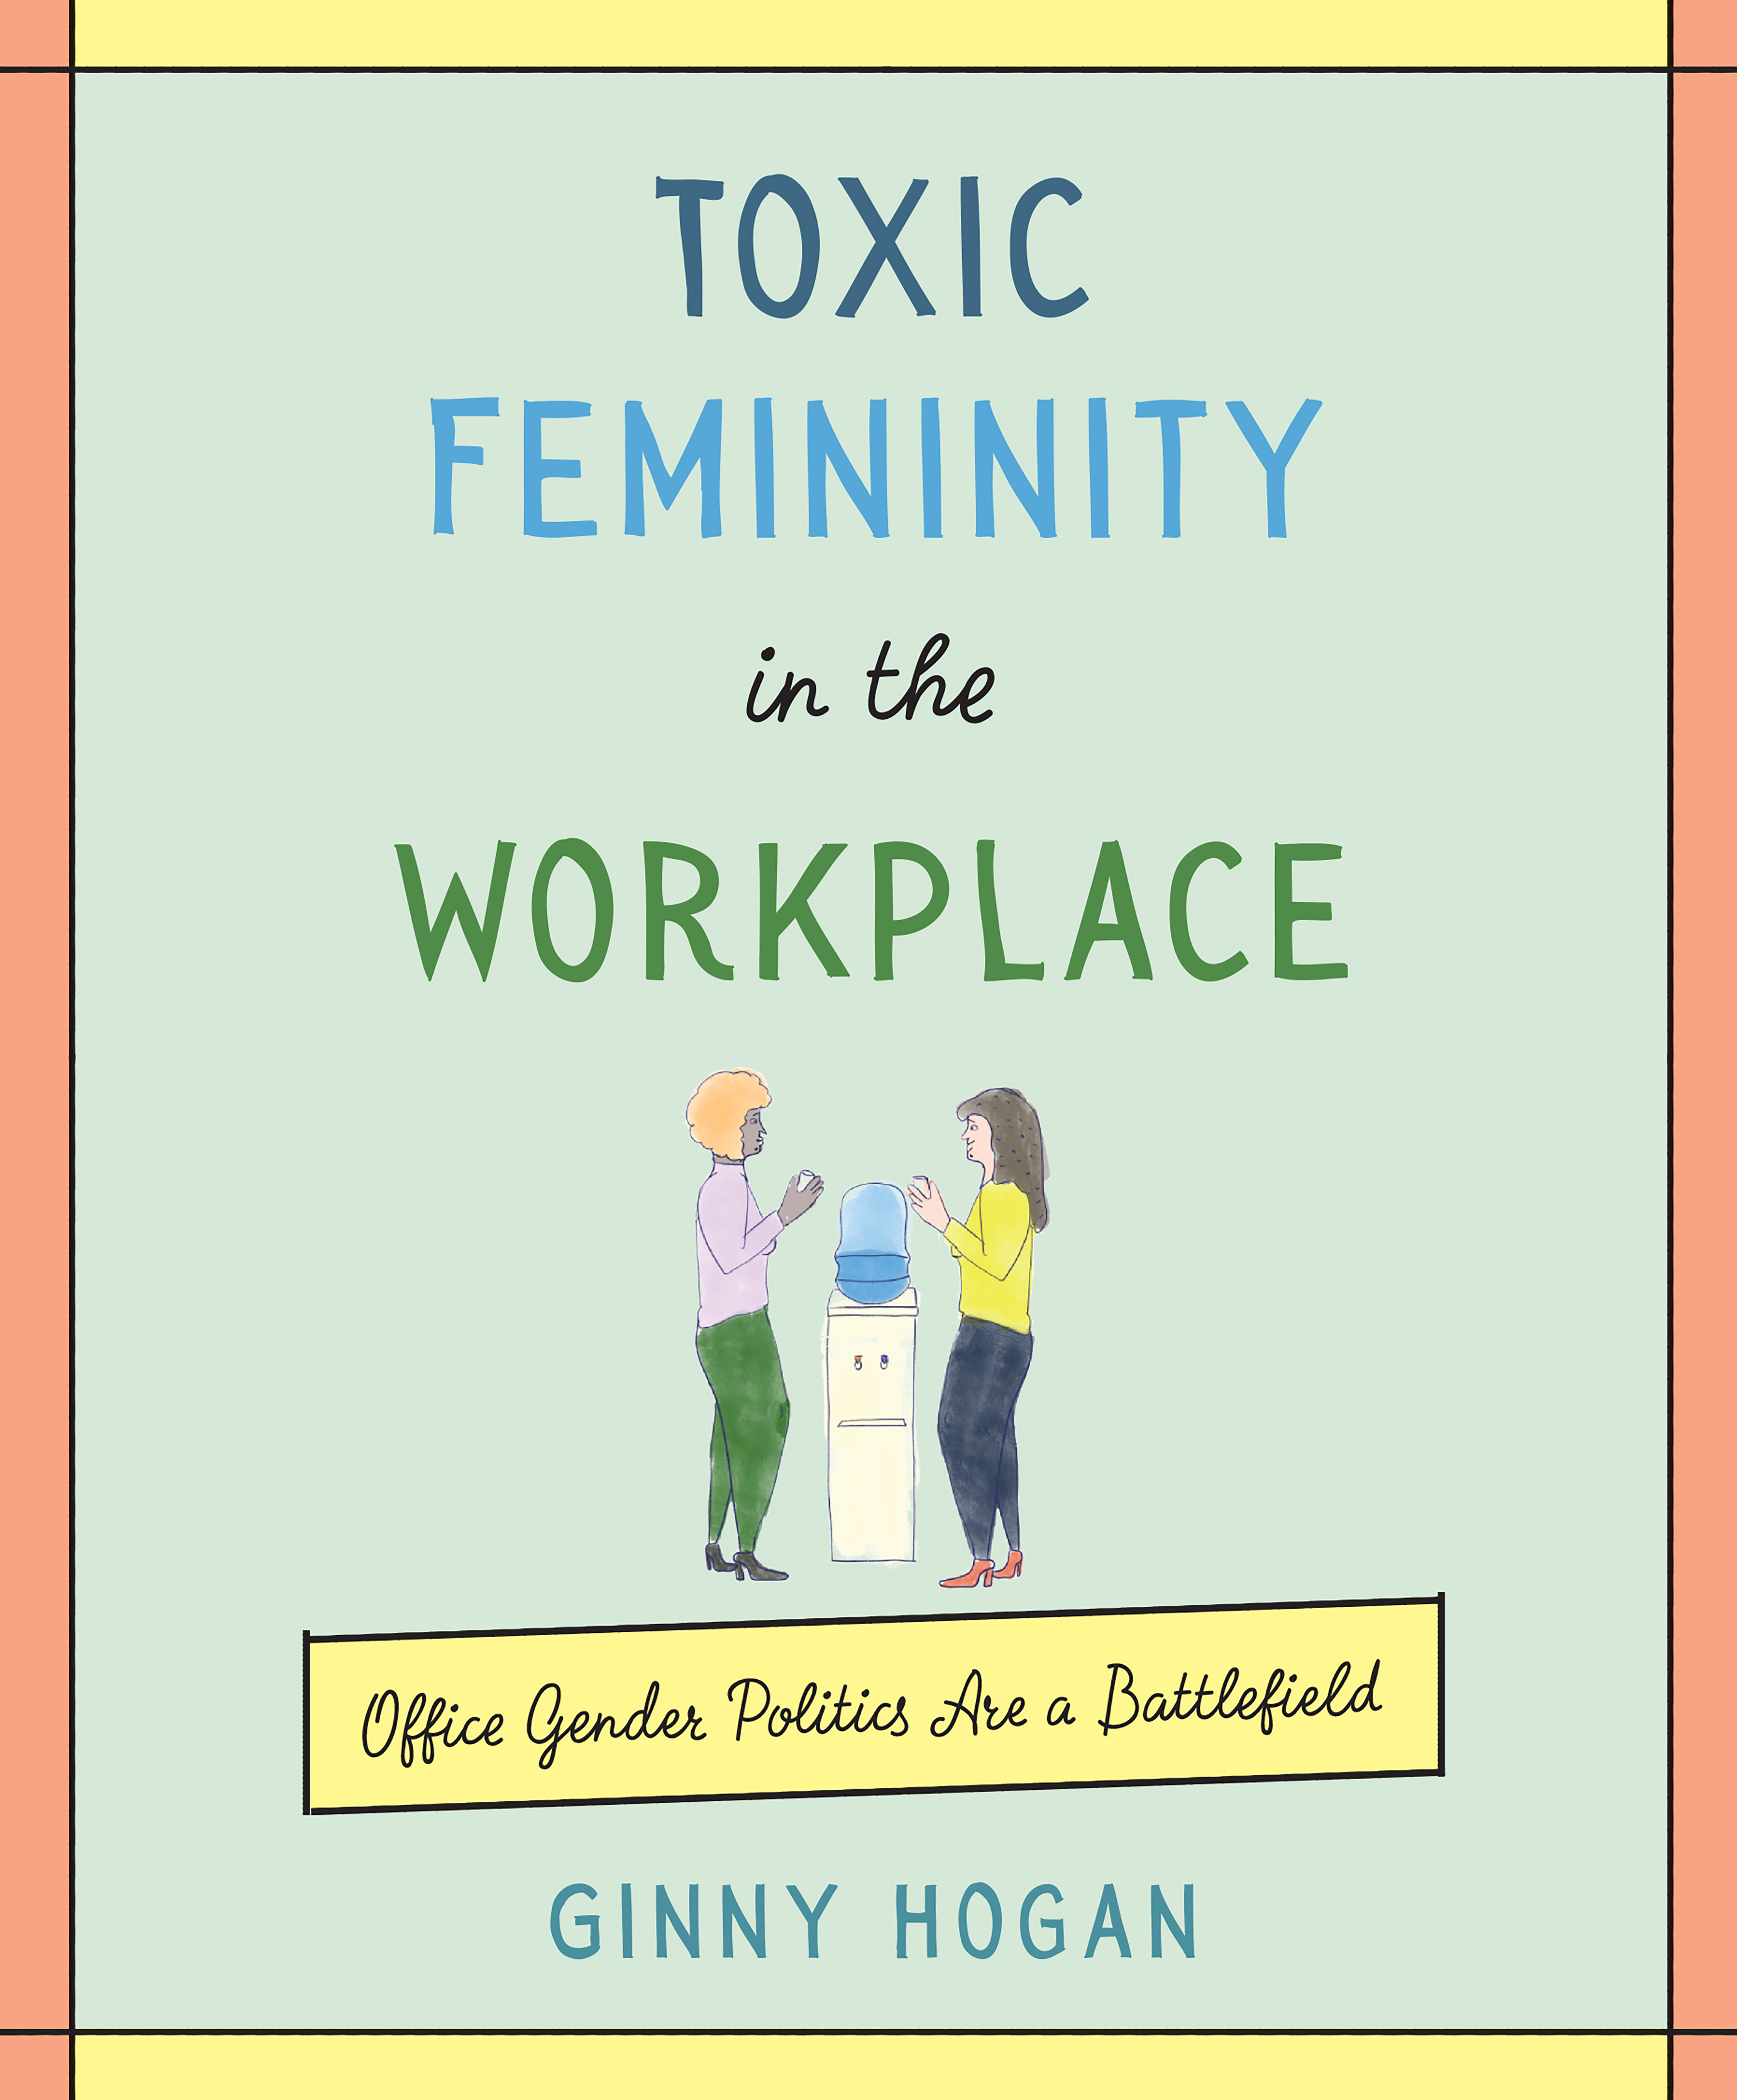 Book Launch: Toxic Femininity in the Workplace by Ginny Hogan